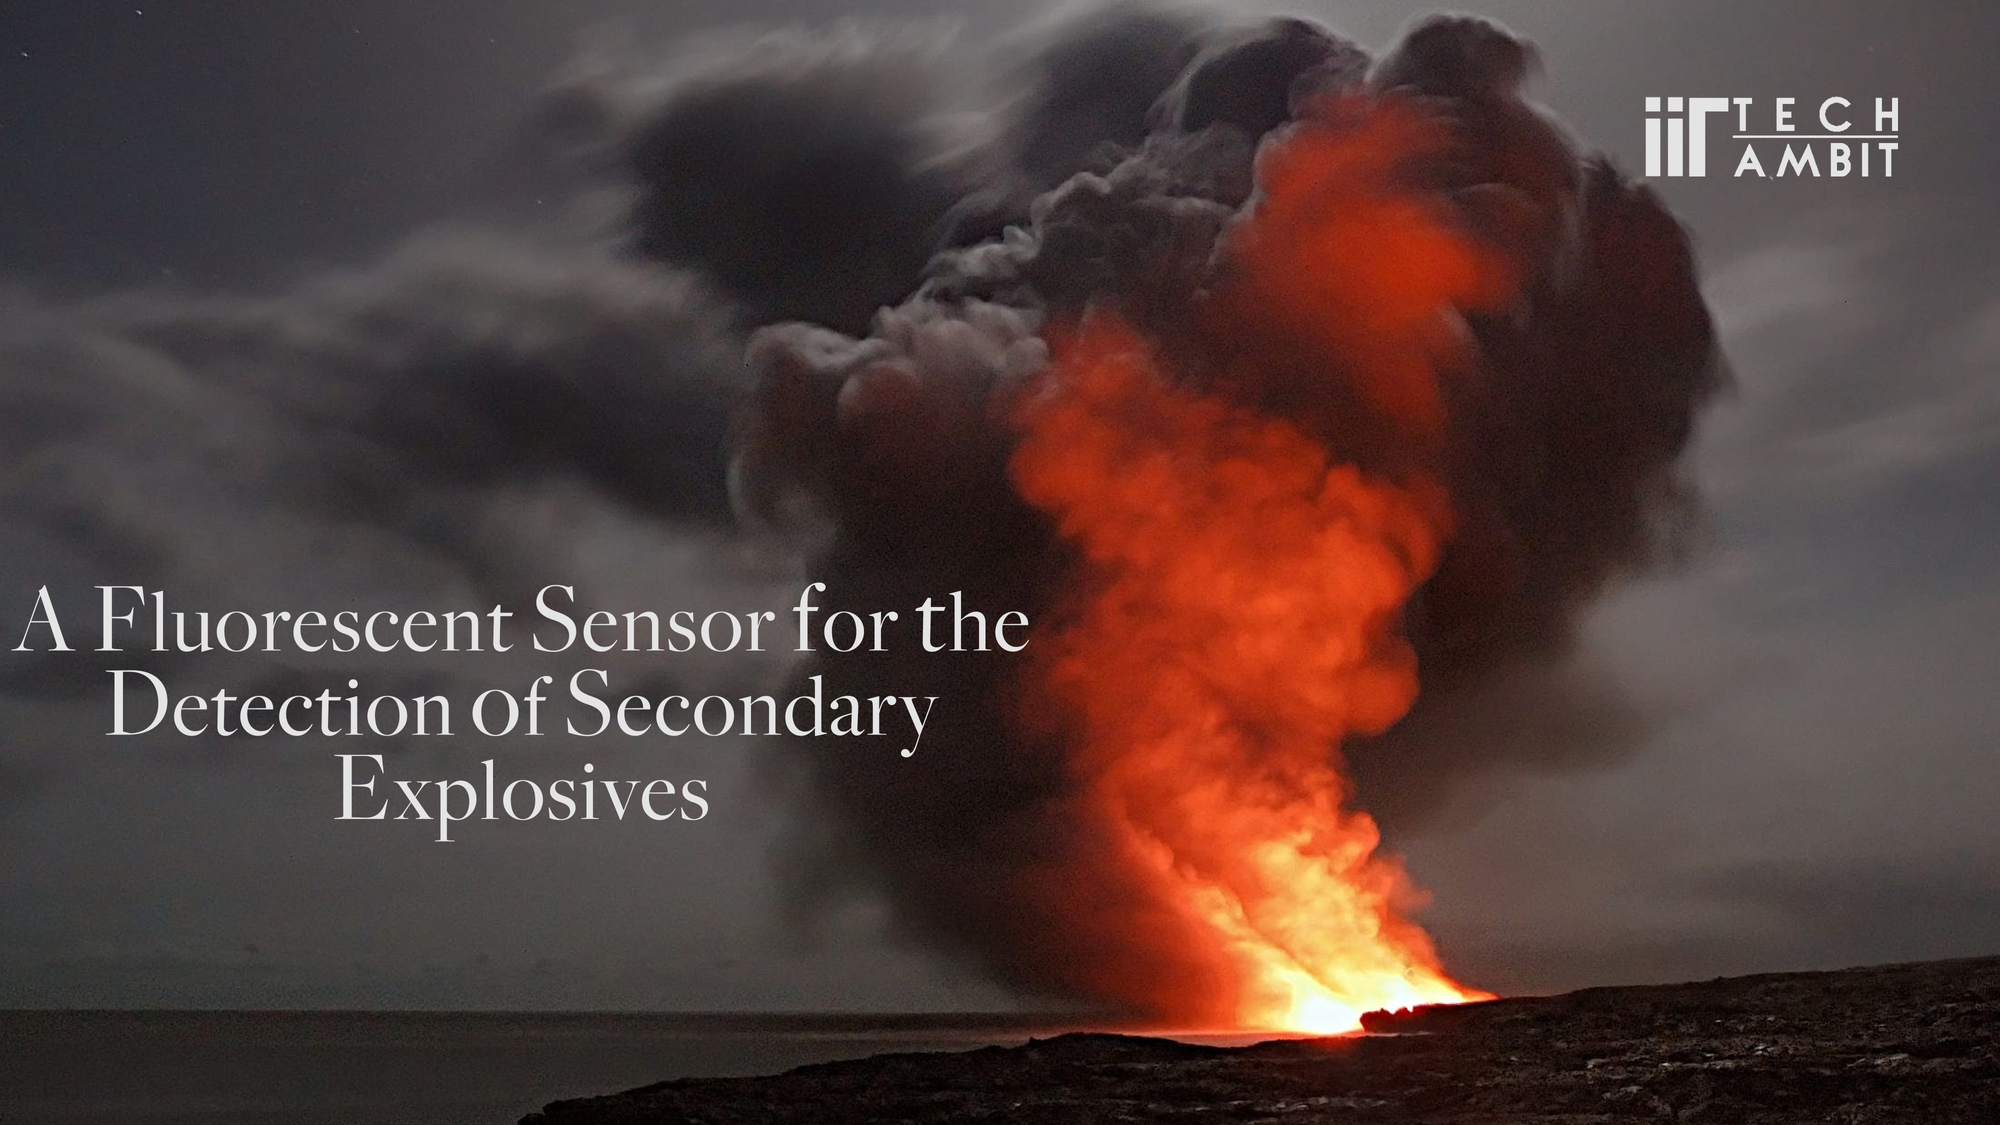 A Fluorescent Sensor for the Detection of Secondary Explosives